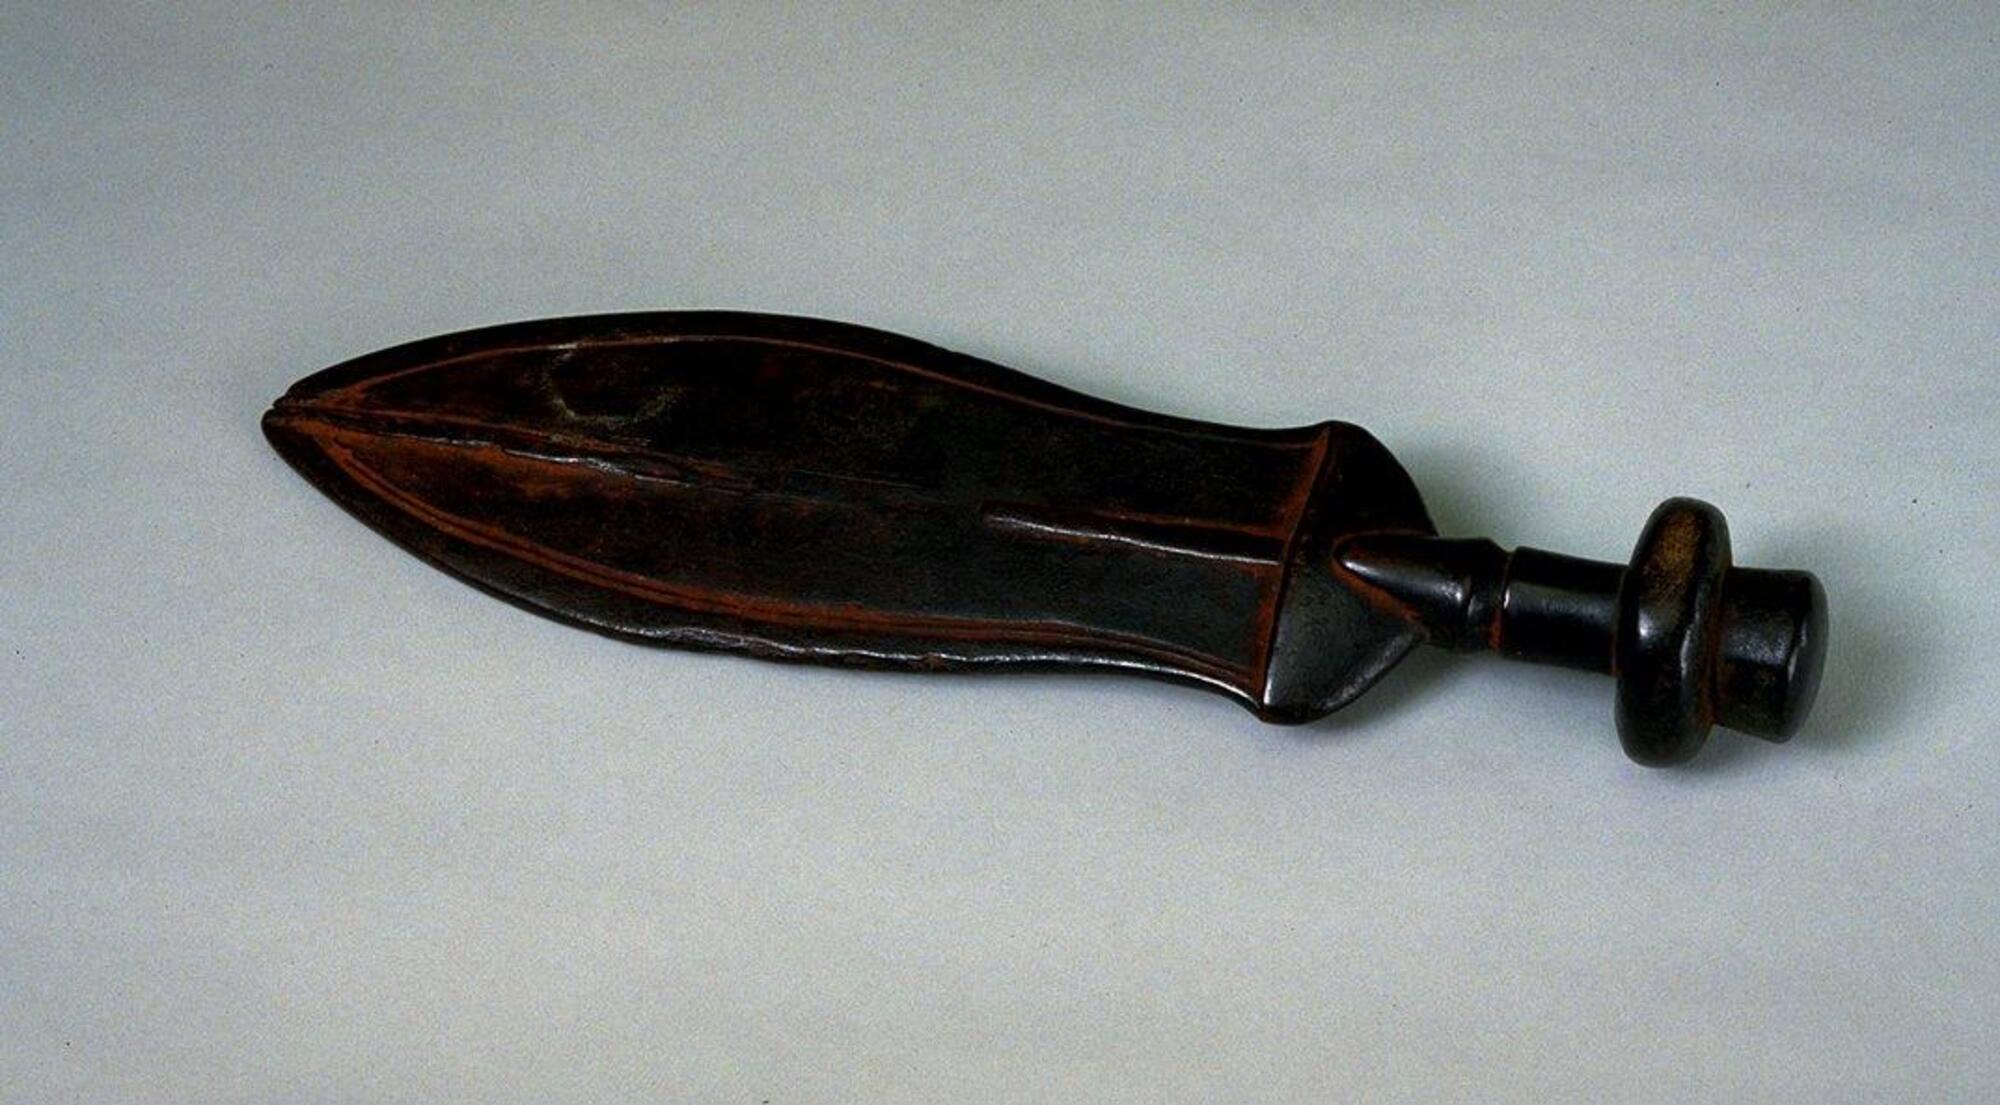 Wooden knife with a leaf shaped blade. The center of the blade has a carved line running down the length of the blade. The knife has patination. There is tukula powder rubbed on the knife. 